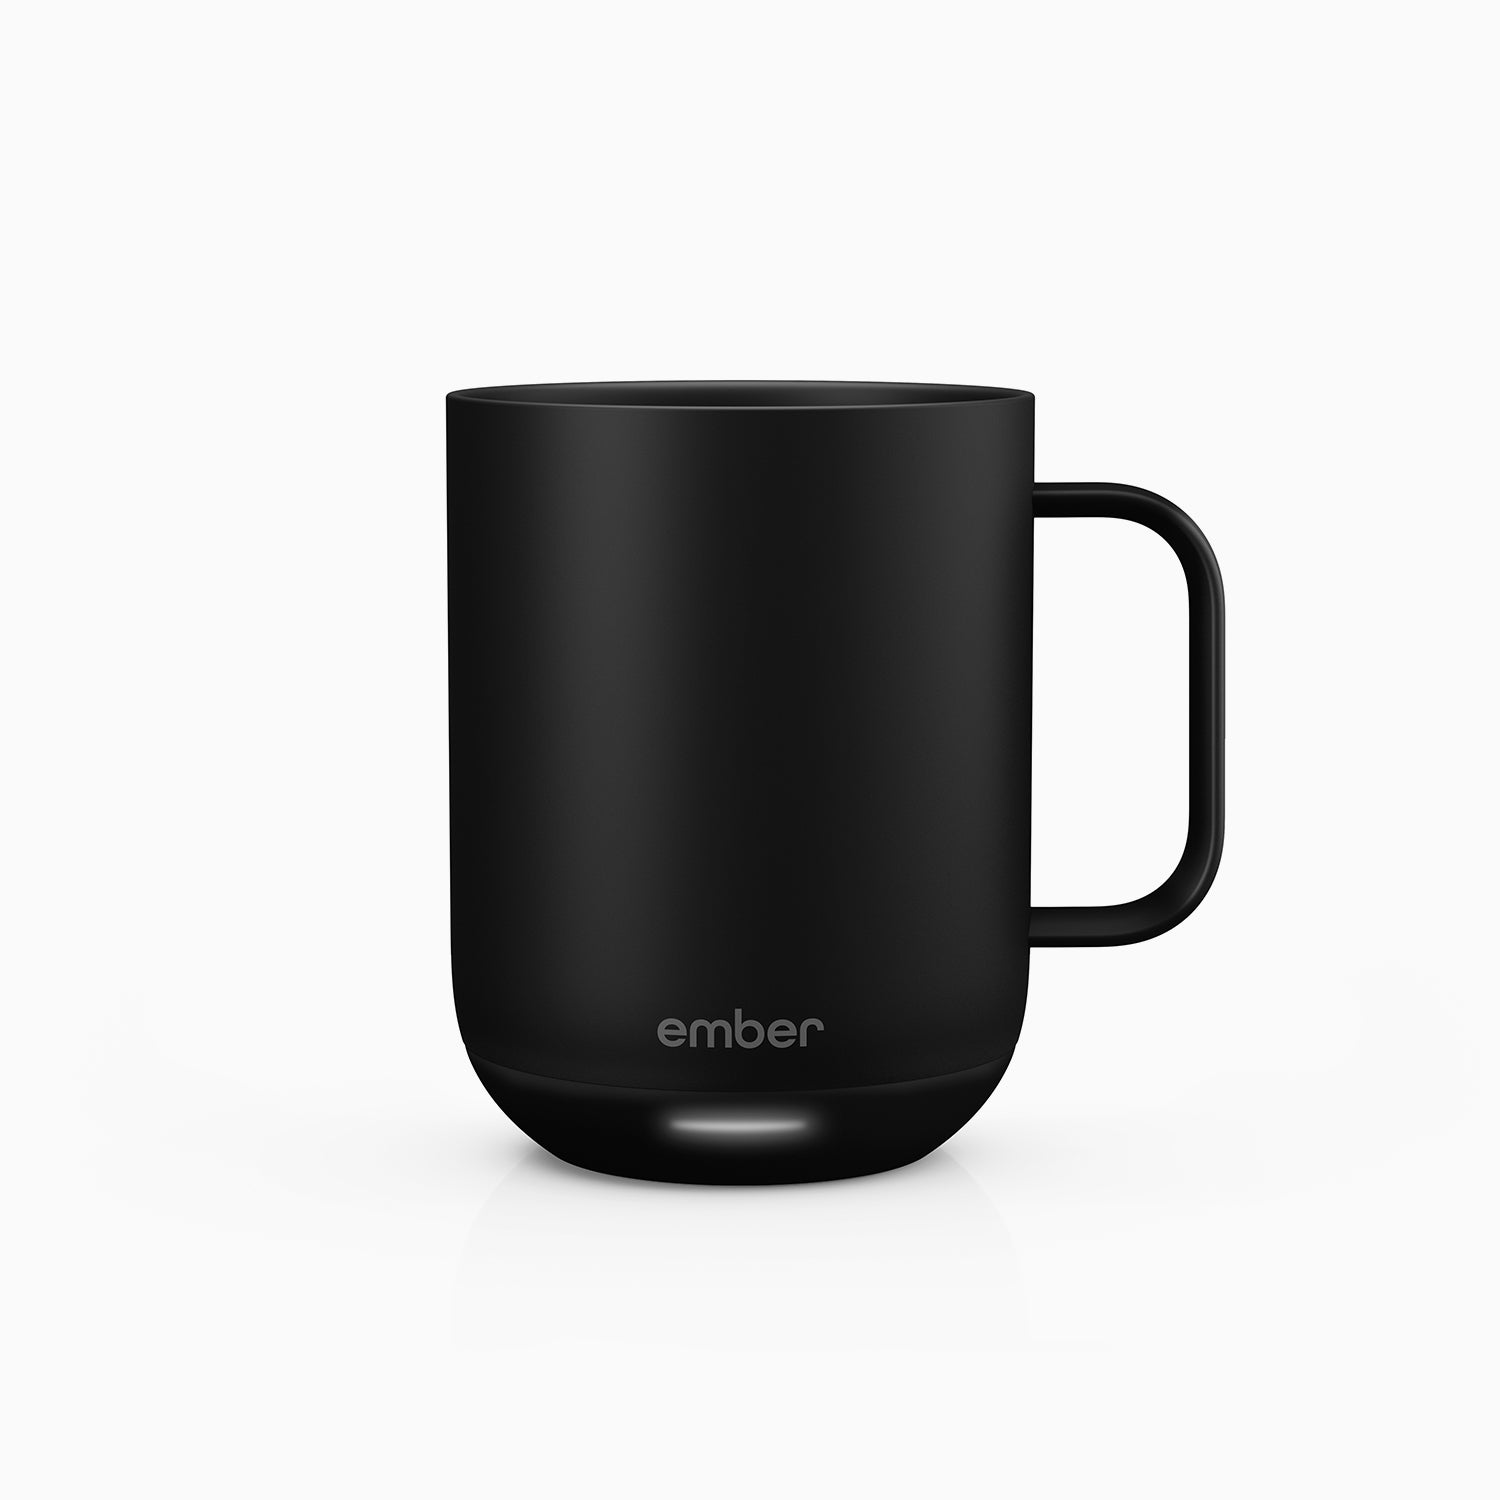 The self-heating Ember Mug 2 actually makes me drink less coffee,  ironically